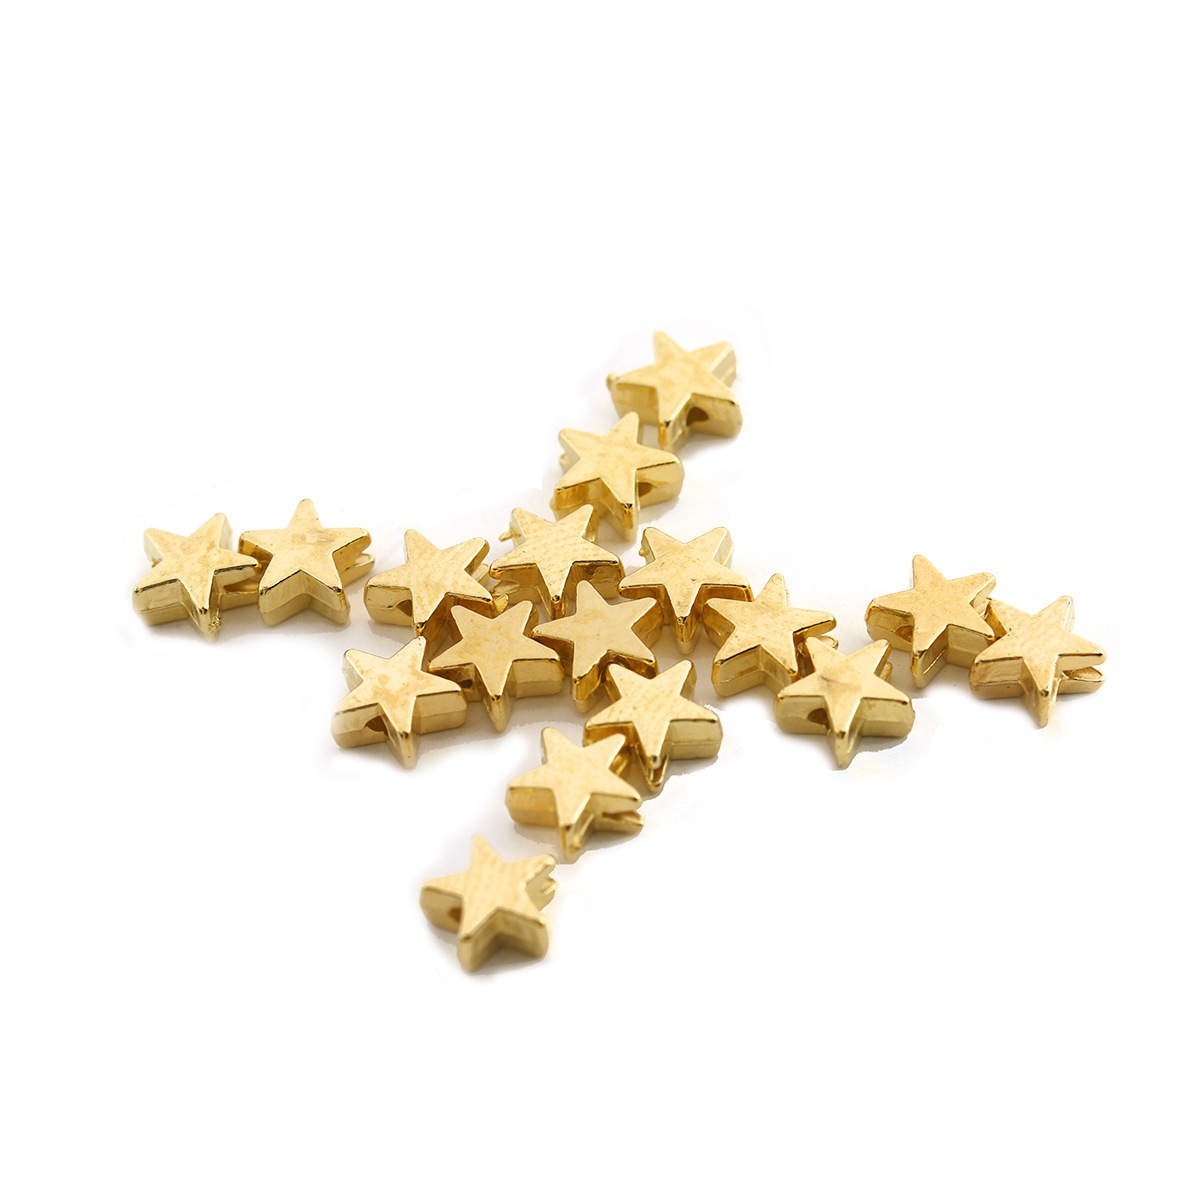 3:Gold five pointed star 6x6mm, 1mm